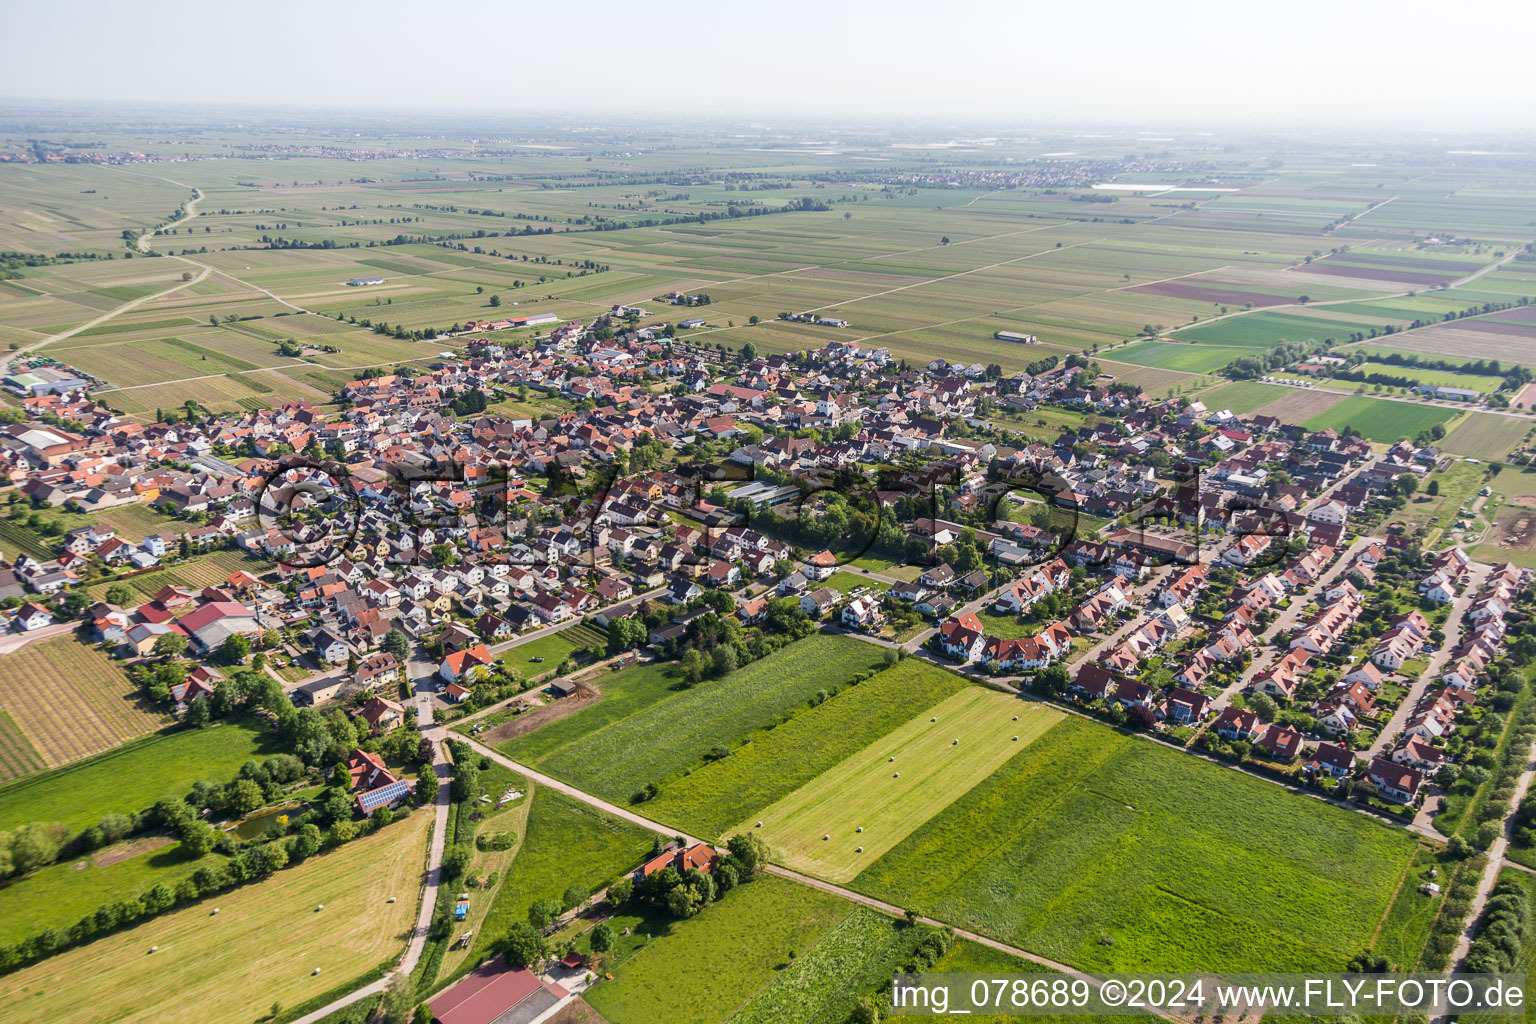 Village - view on the edge of agricultural fields and farmland in Niederkirchen bei Deidesheim in the state Rhineland-Palatinate, Germany